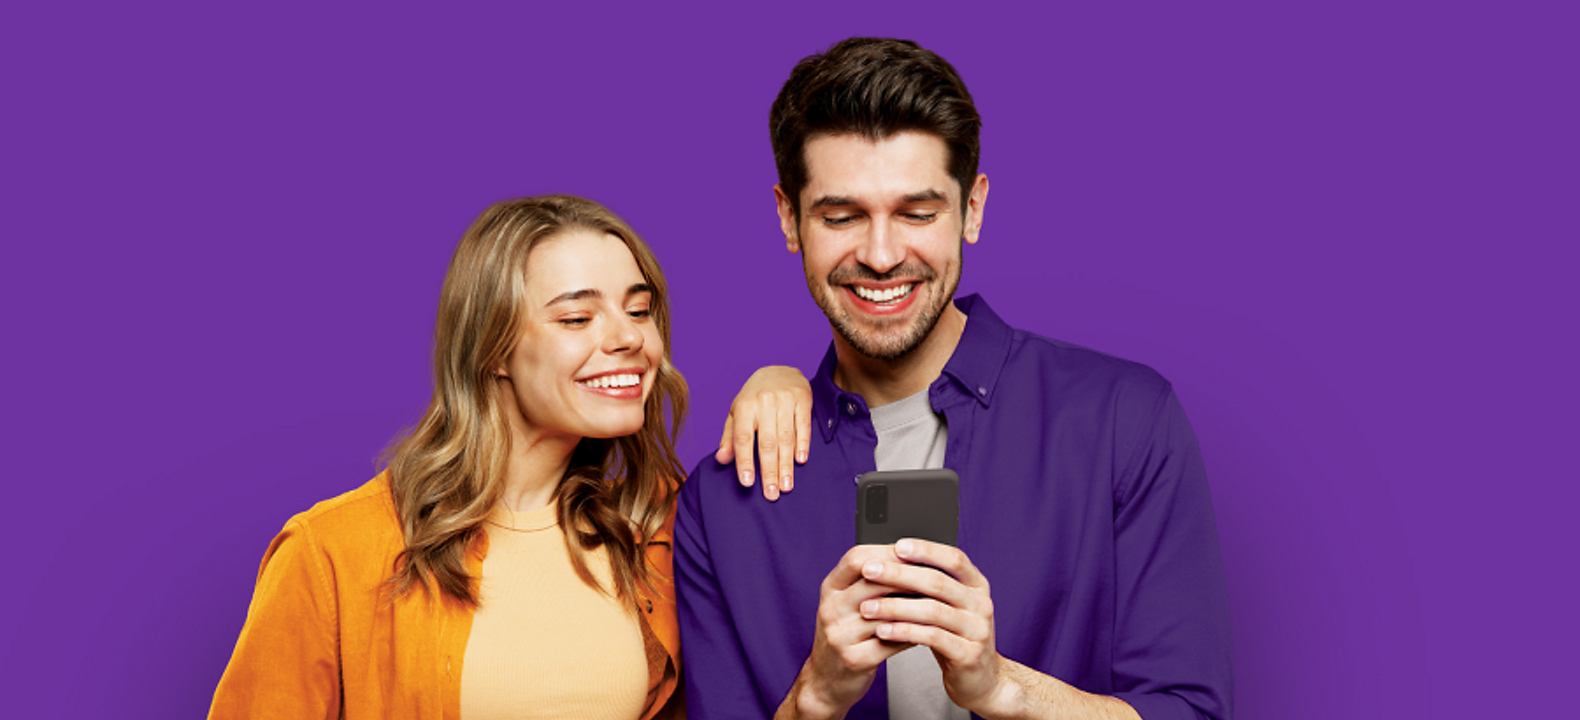 Man and woman smiling while looking at phone.